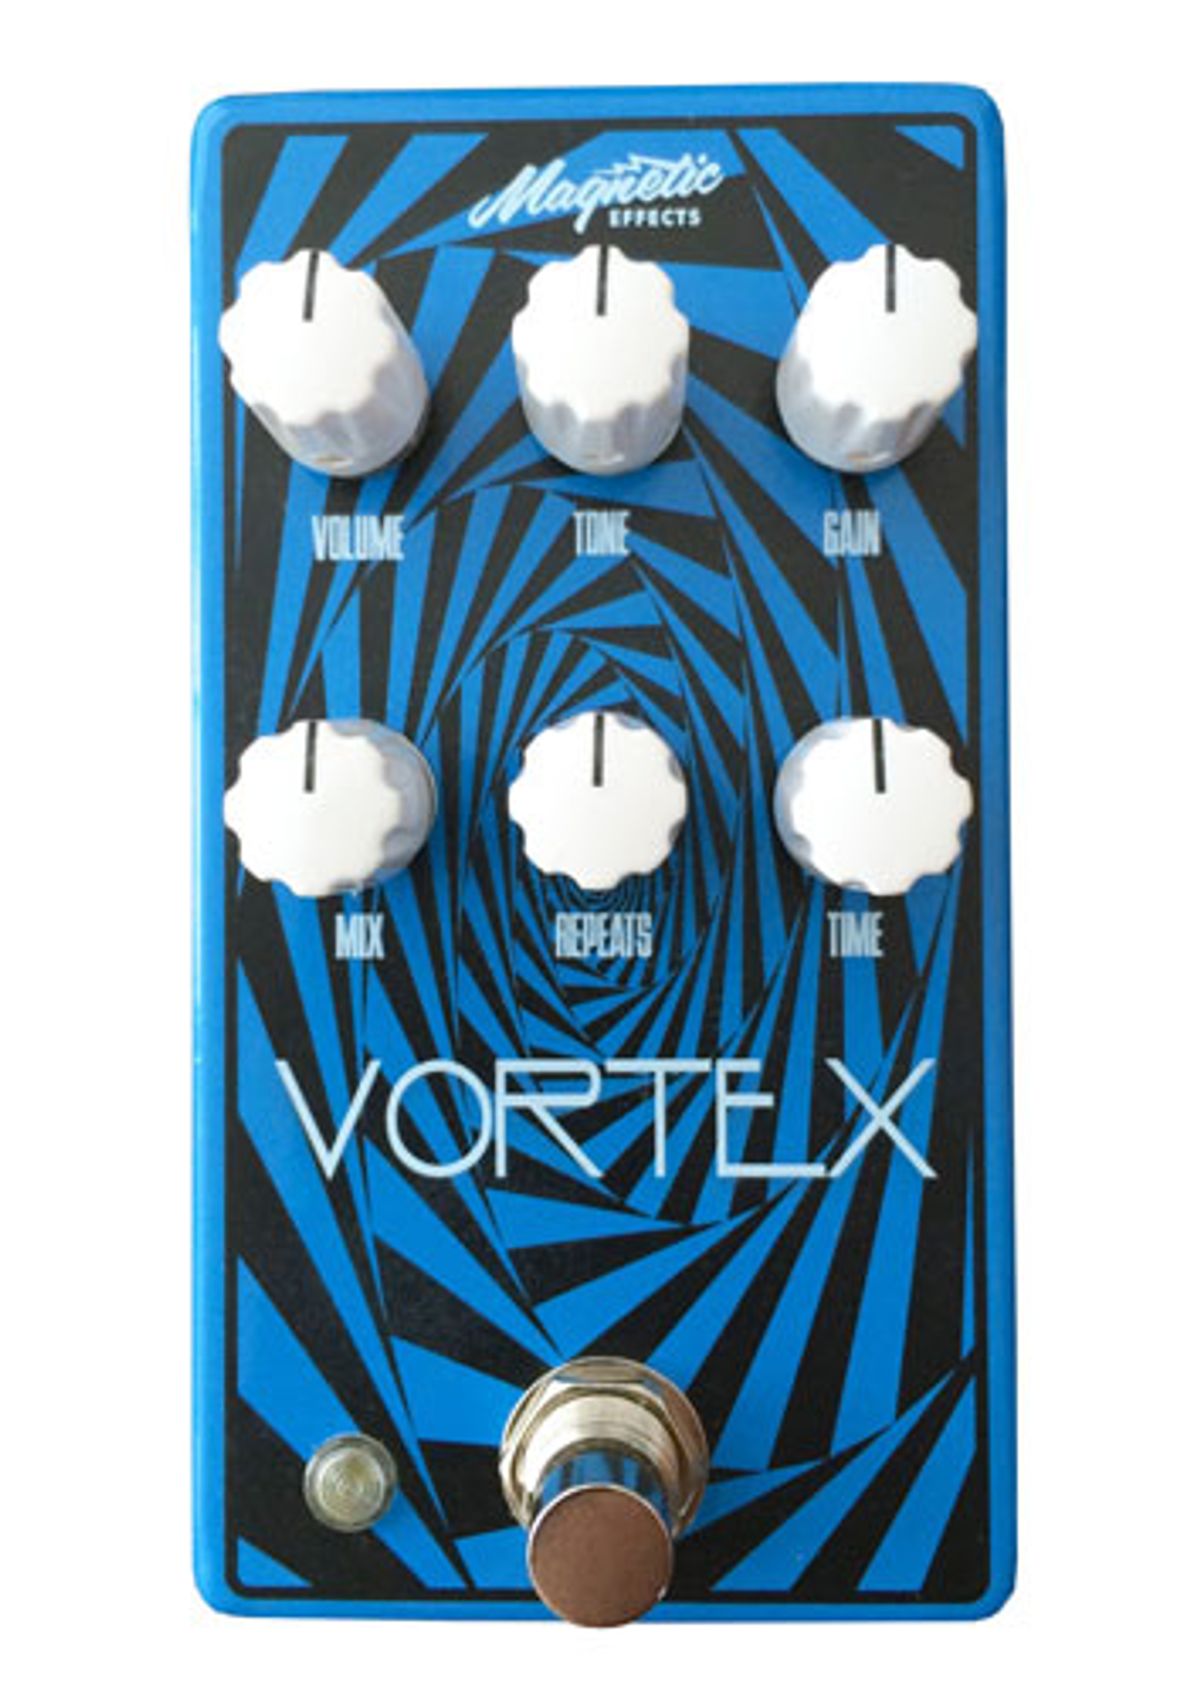 Magnetic Effects Introduces the Vortex